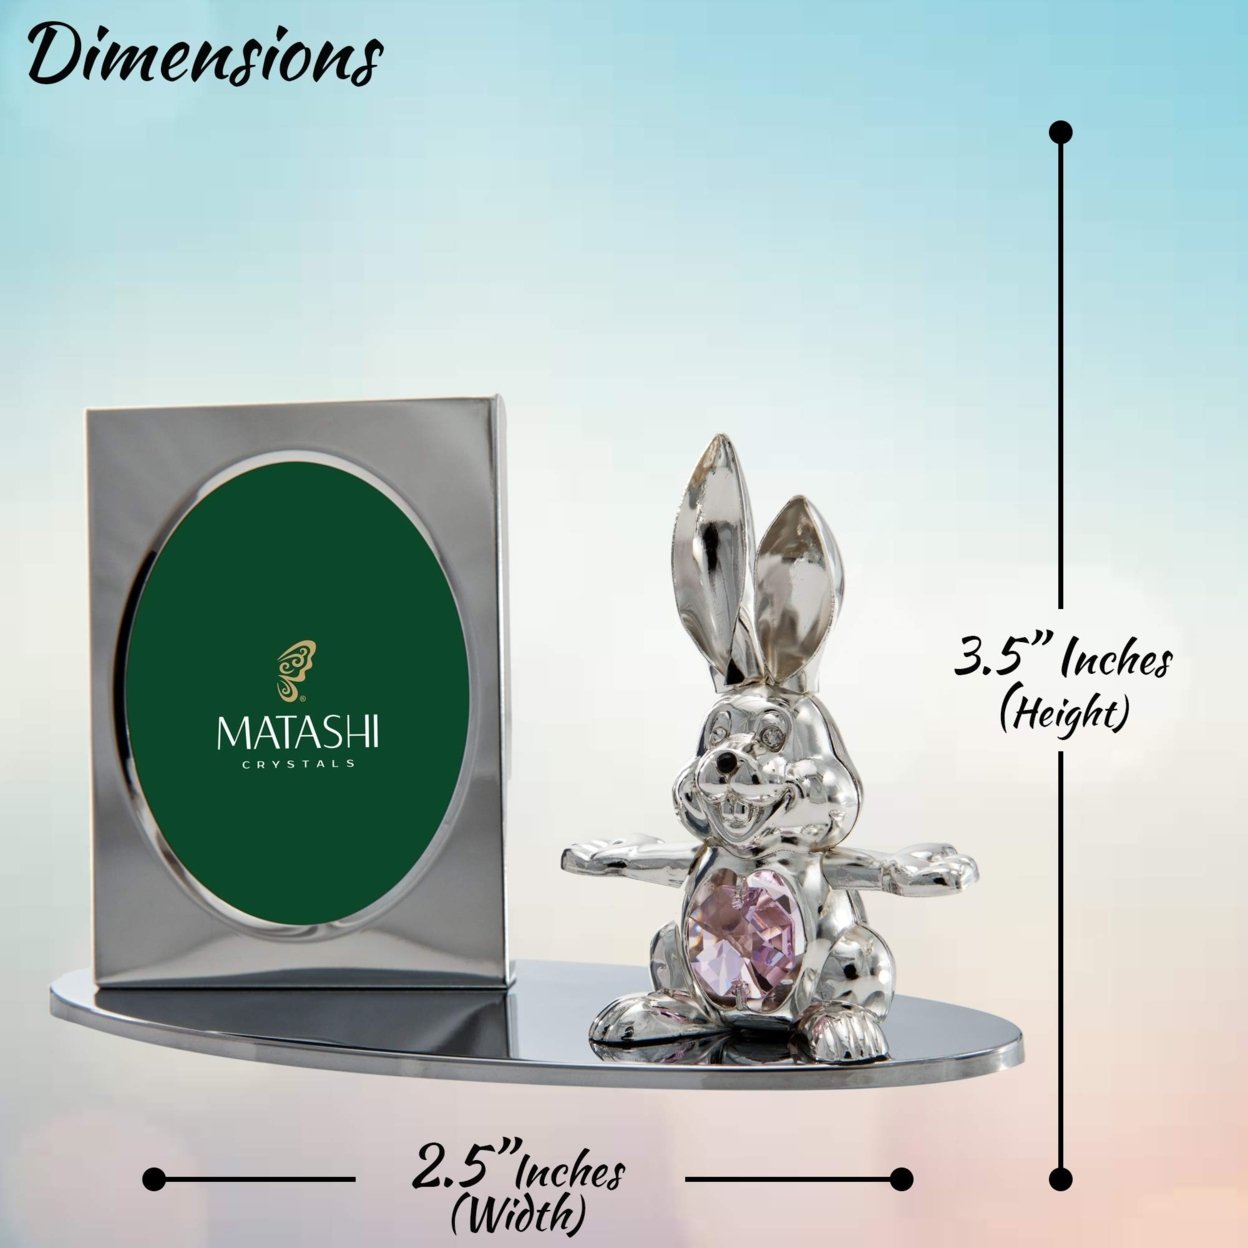 Matashi Silver Plated Picture Frame With Crystal Decorated Cartoon Bunny Figurine On A Base Gift For Christmas Mother's Day Birthday